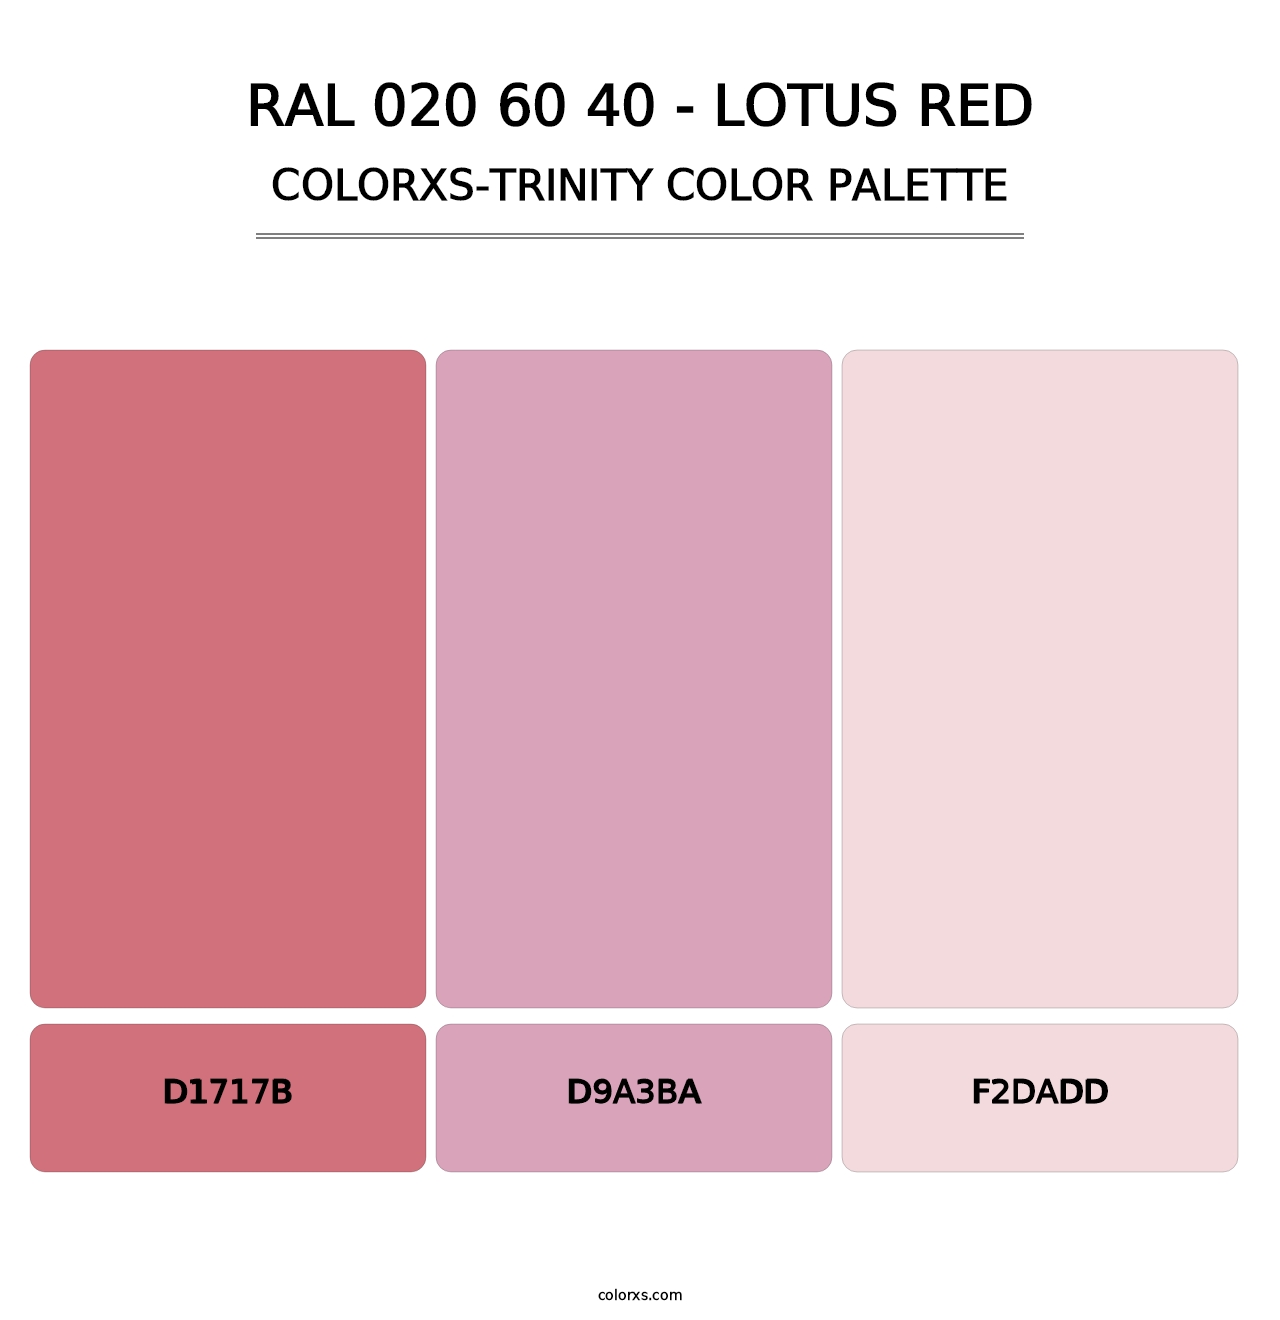 RAL 020 60 40 - Lotus Red - Colorxs Trinity Palette